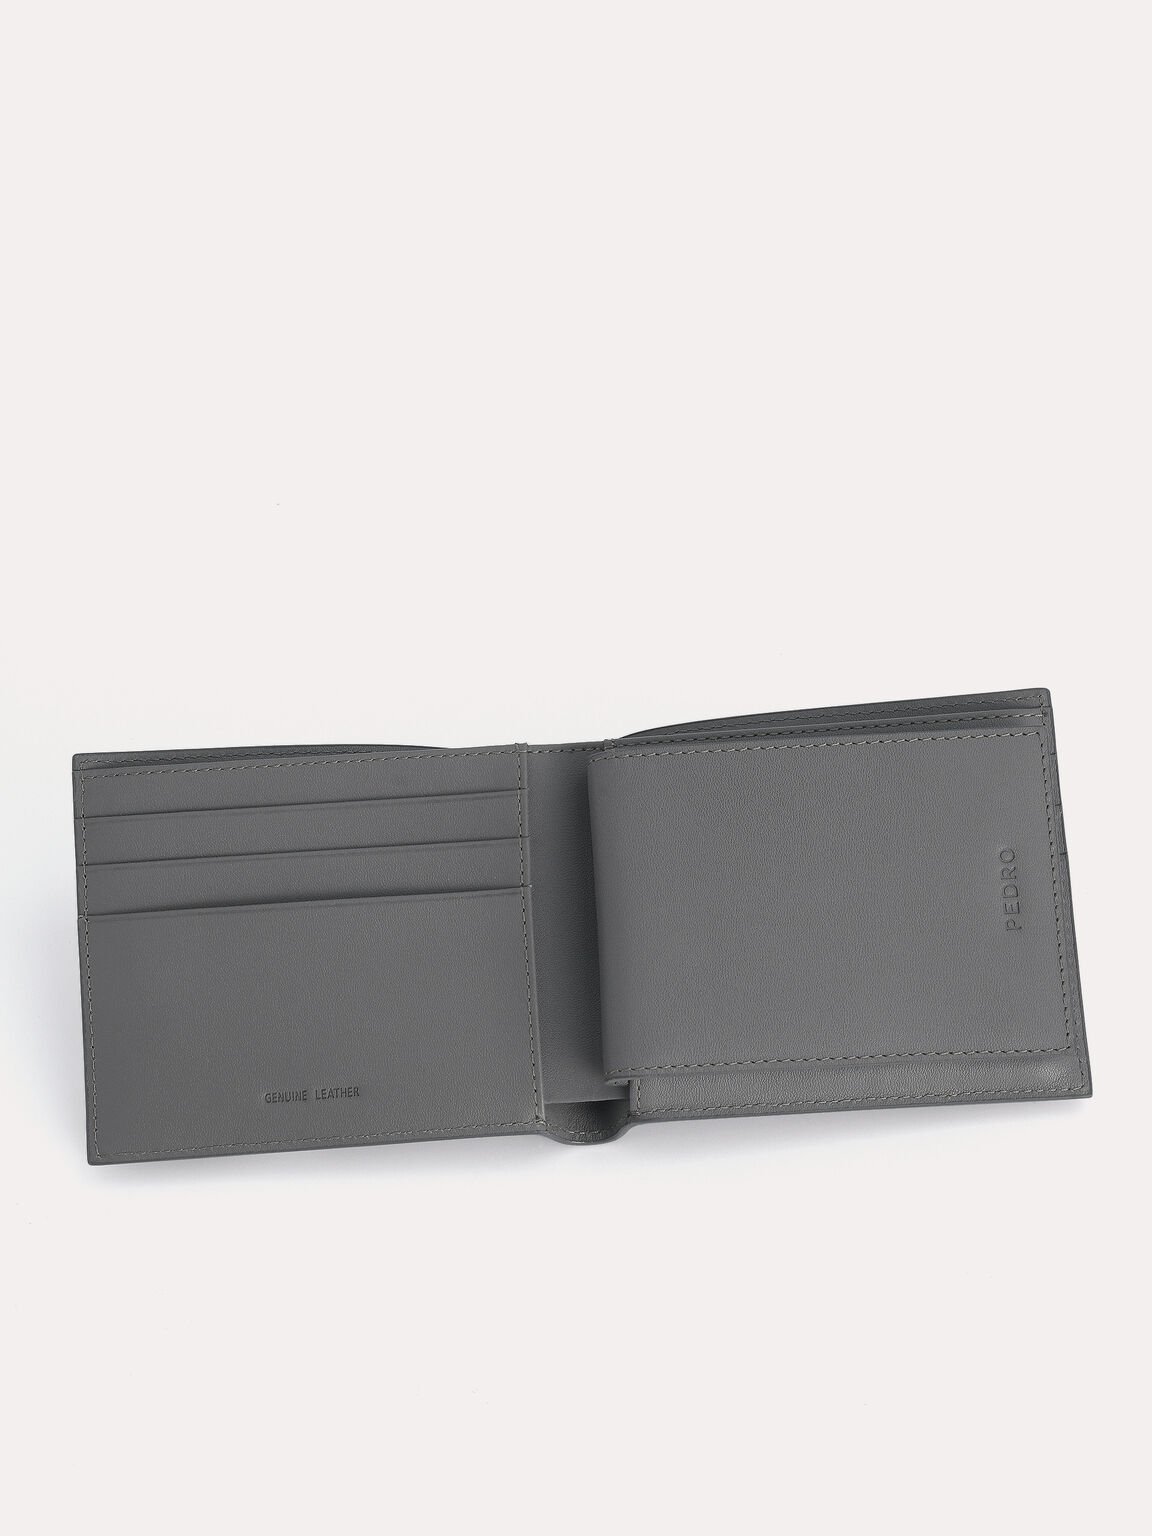 Textured Leather Bi-Fold Wallet with Insert, Grey